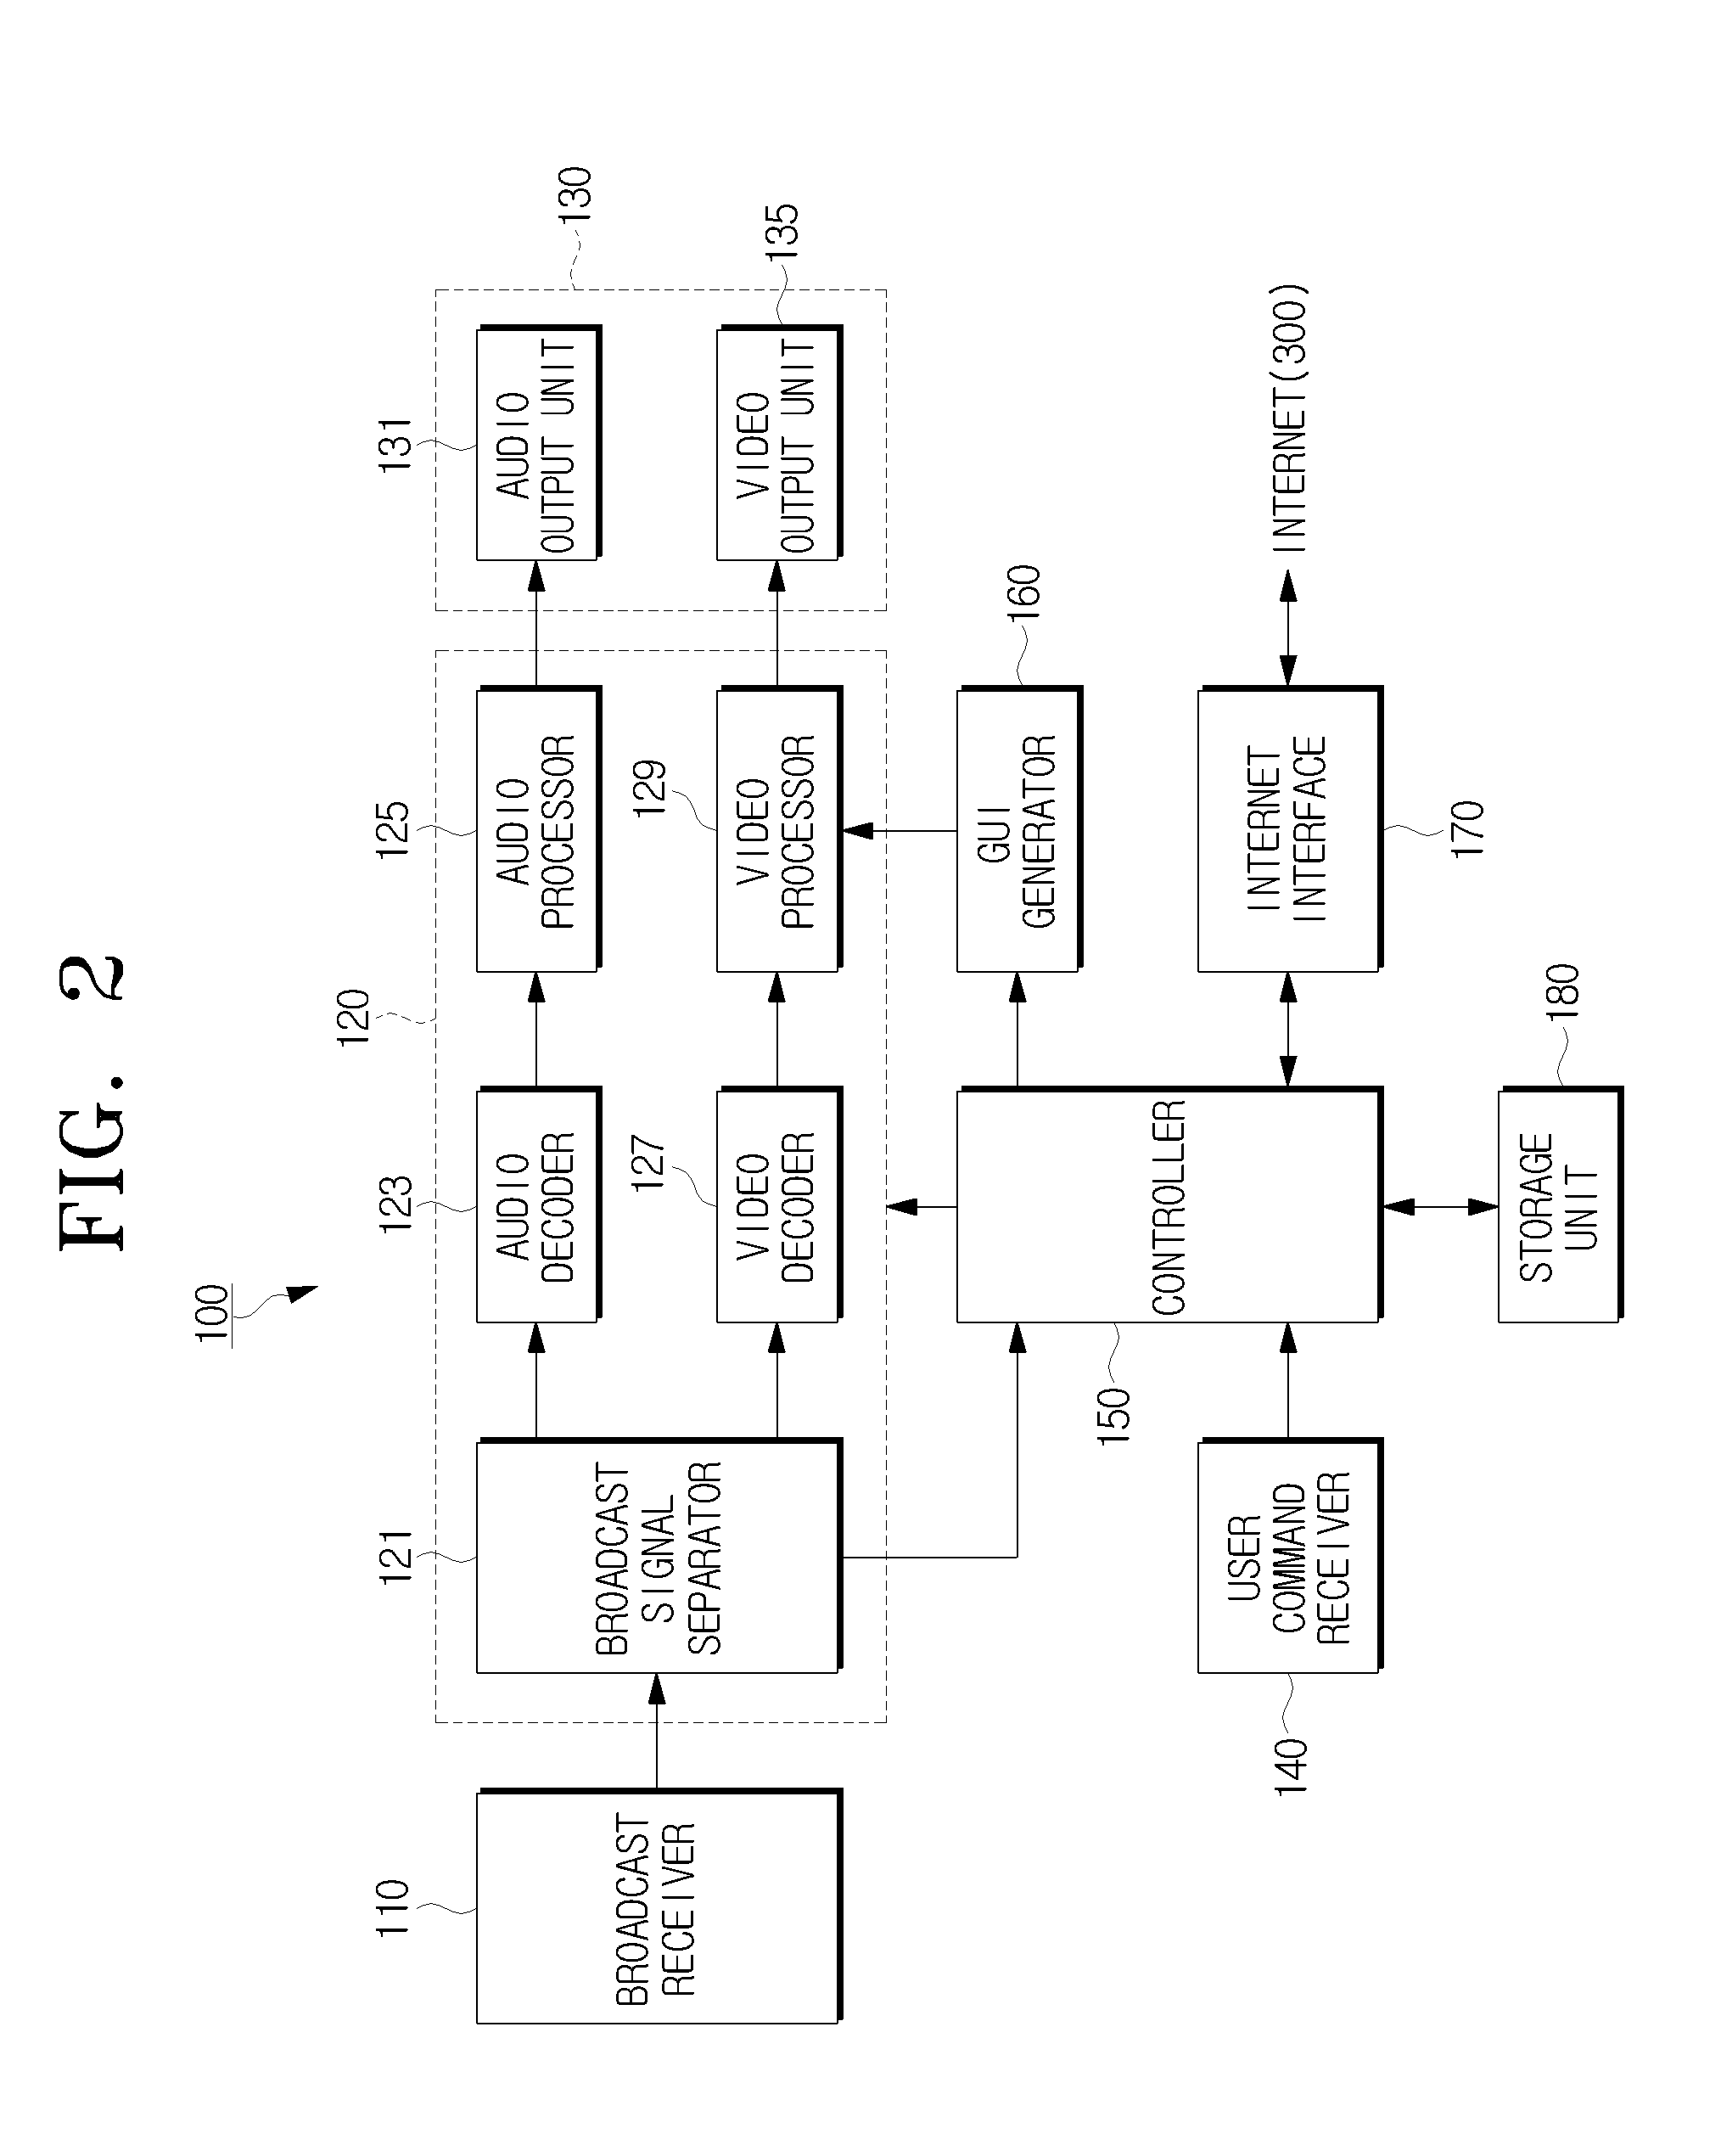 Broadcast scheduling method and broadcast receiving apparatus using the same